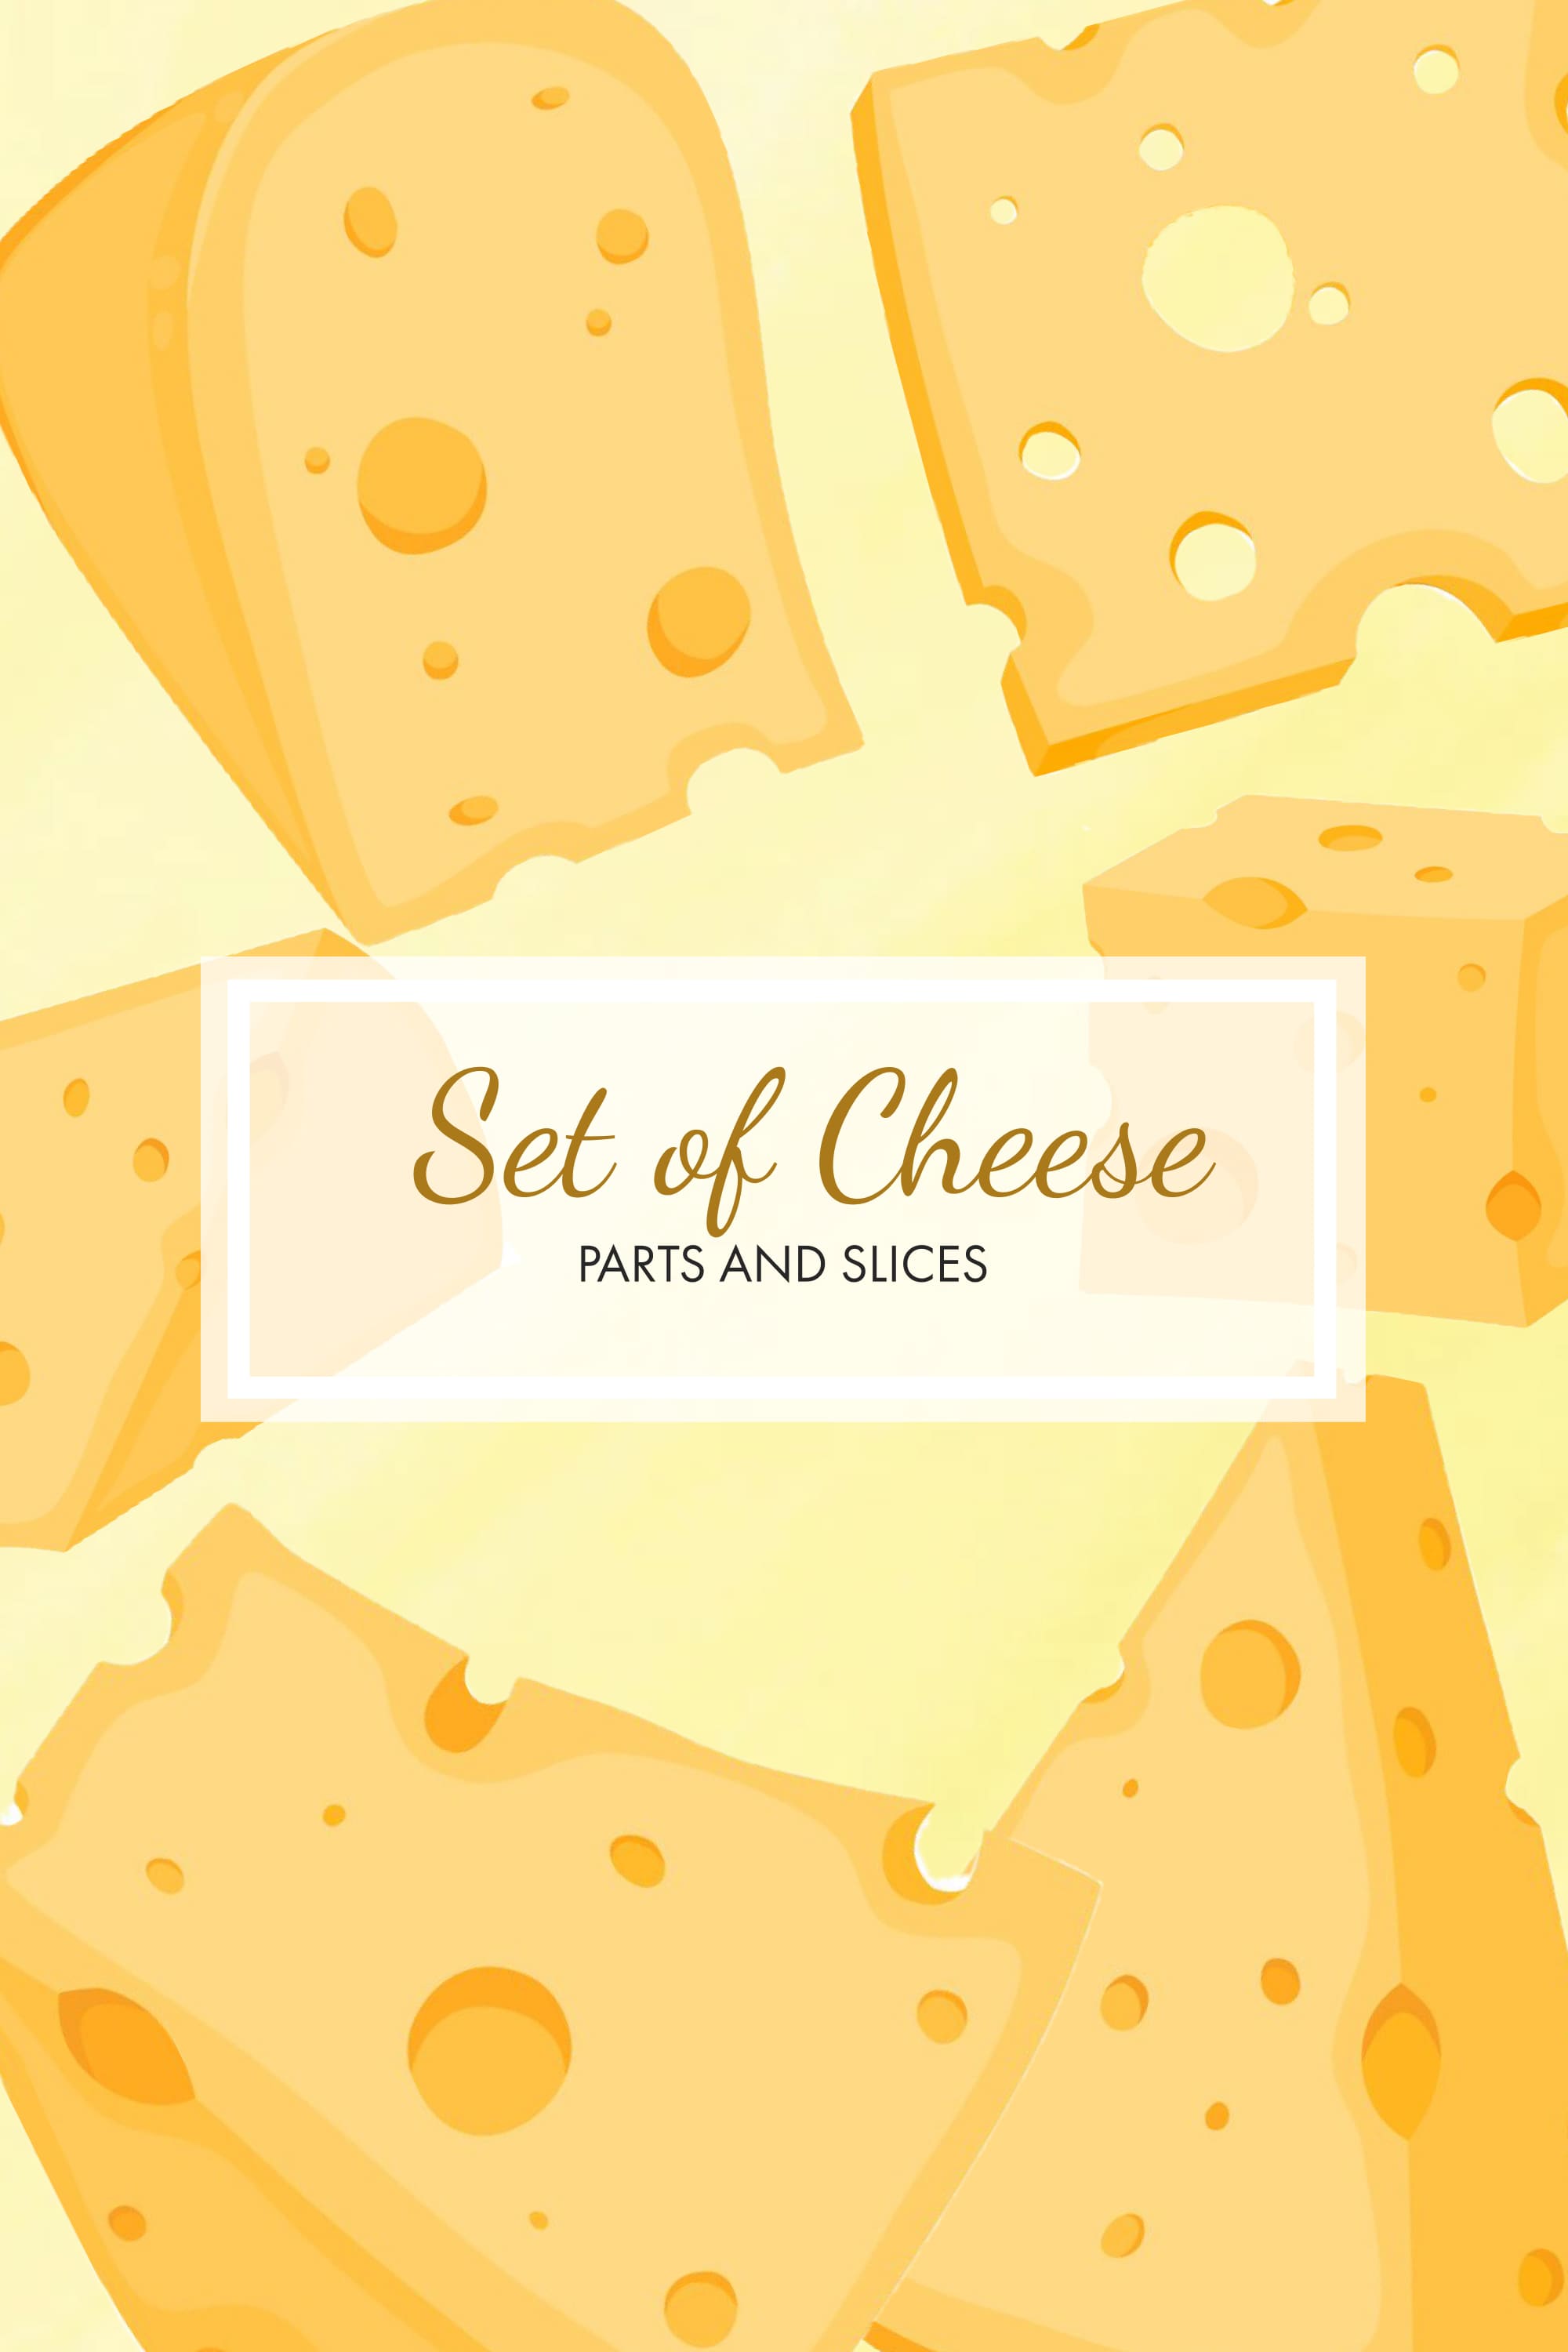 Fine image of slices of hard cheese.